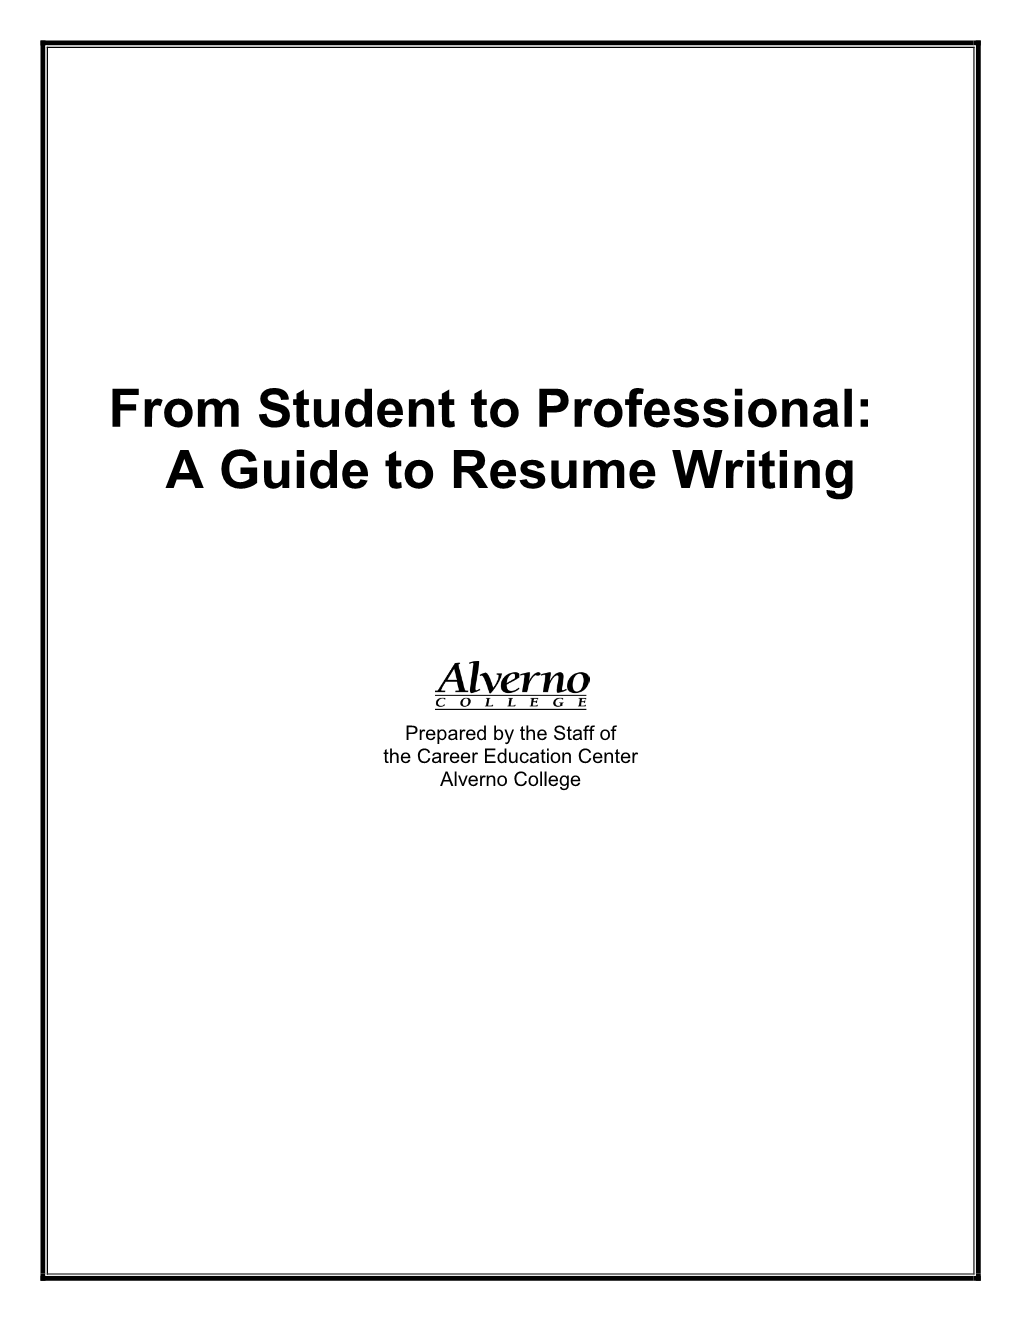 From Student to Professional: a Guide to Resume Writing